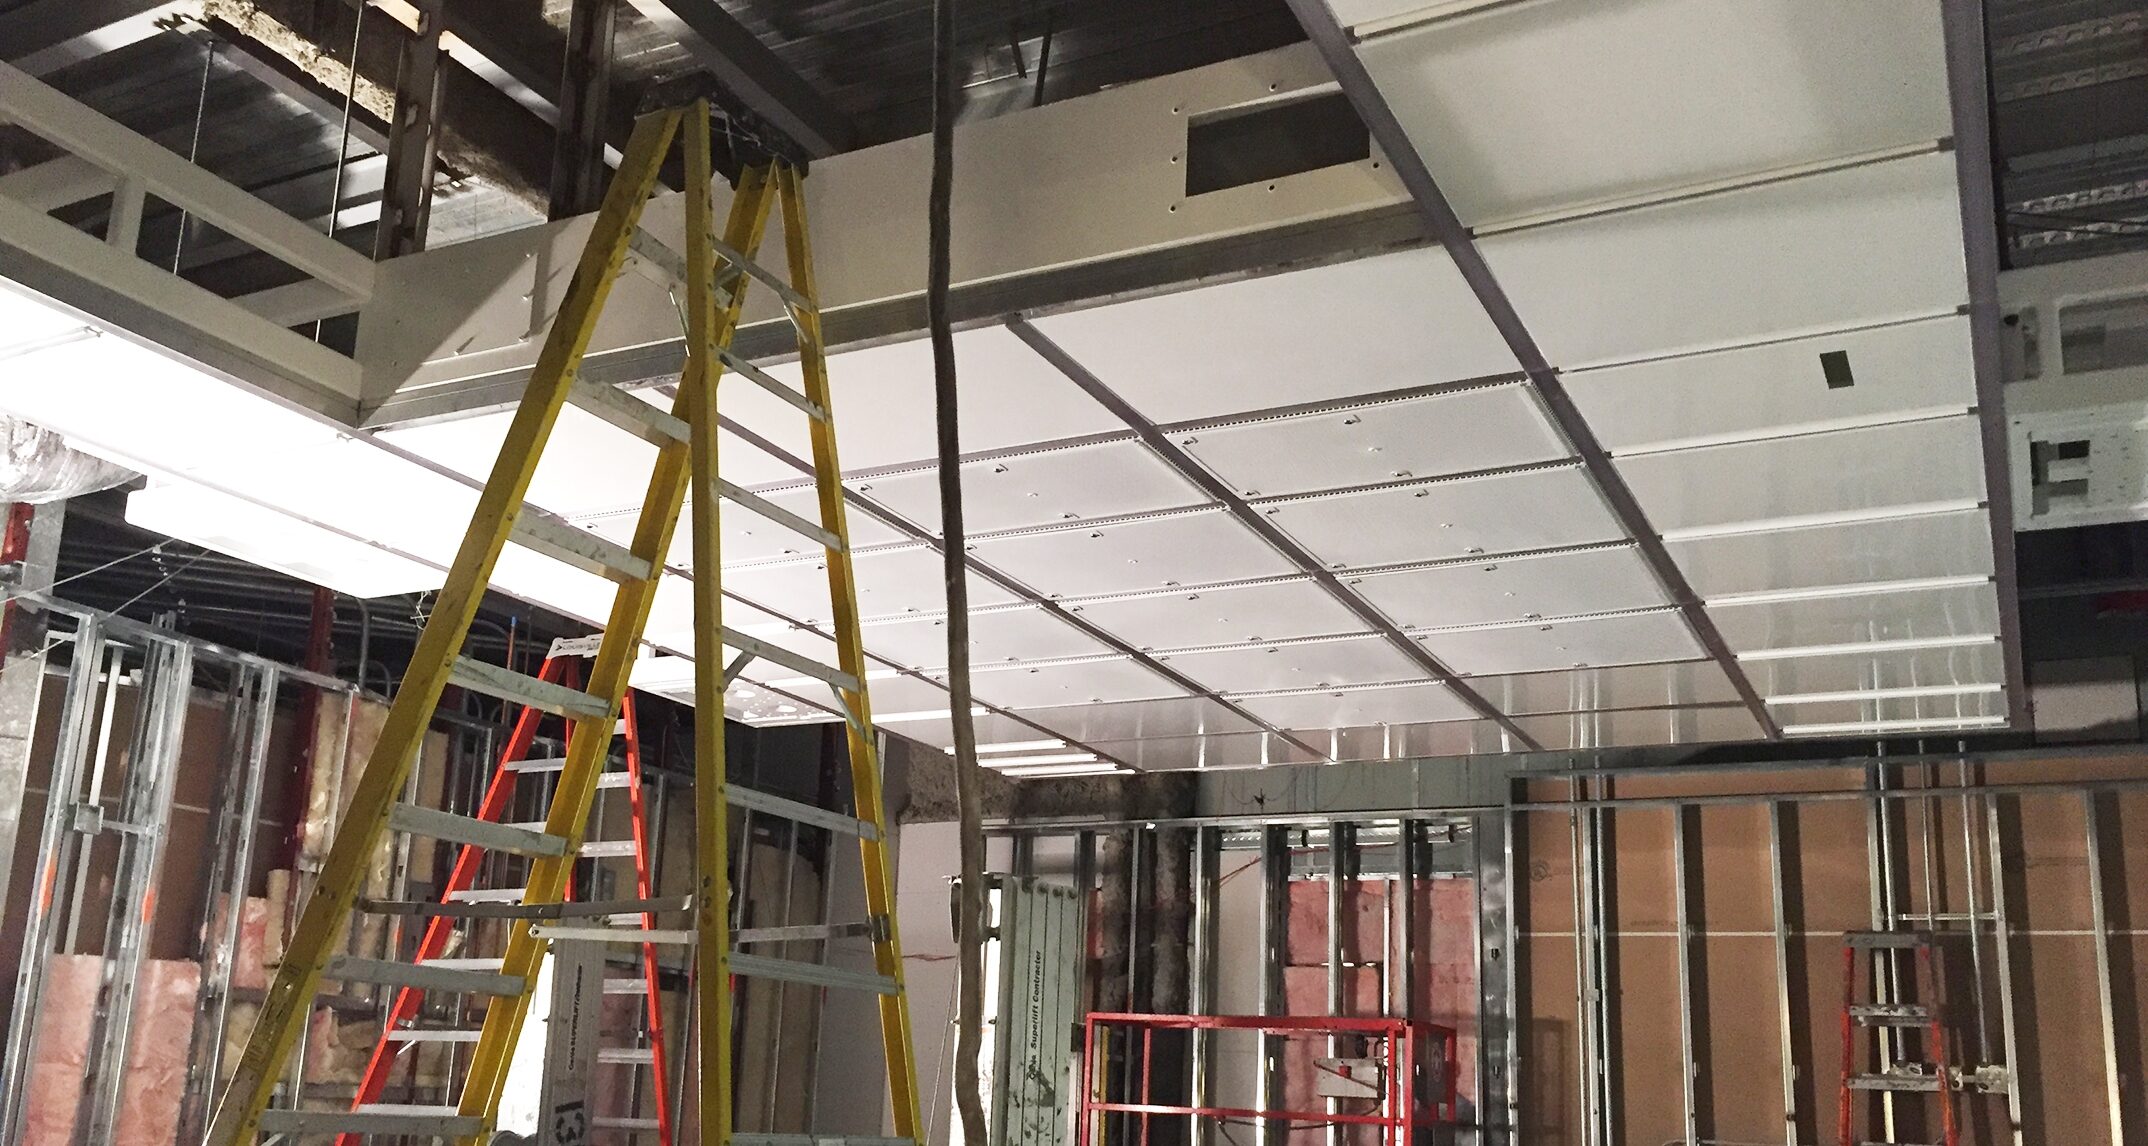 An integrated ceiling system in a hybrid OR houses all overhead equipment in a modular, prefabricated system. This minimizes conflicts with ductwork and utilities. Kootenai Health – NAC